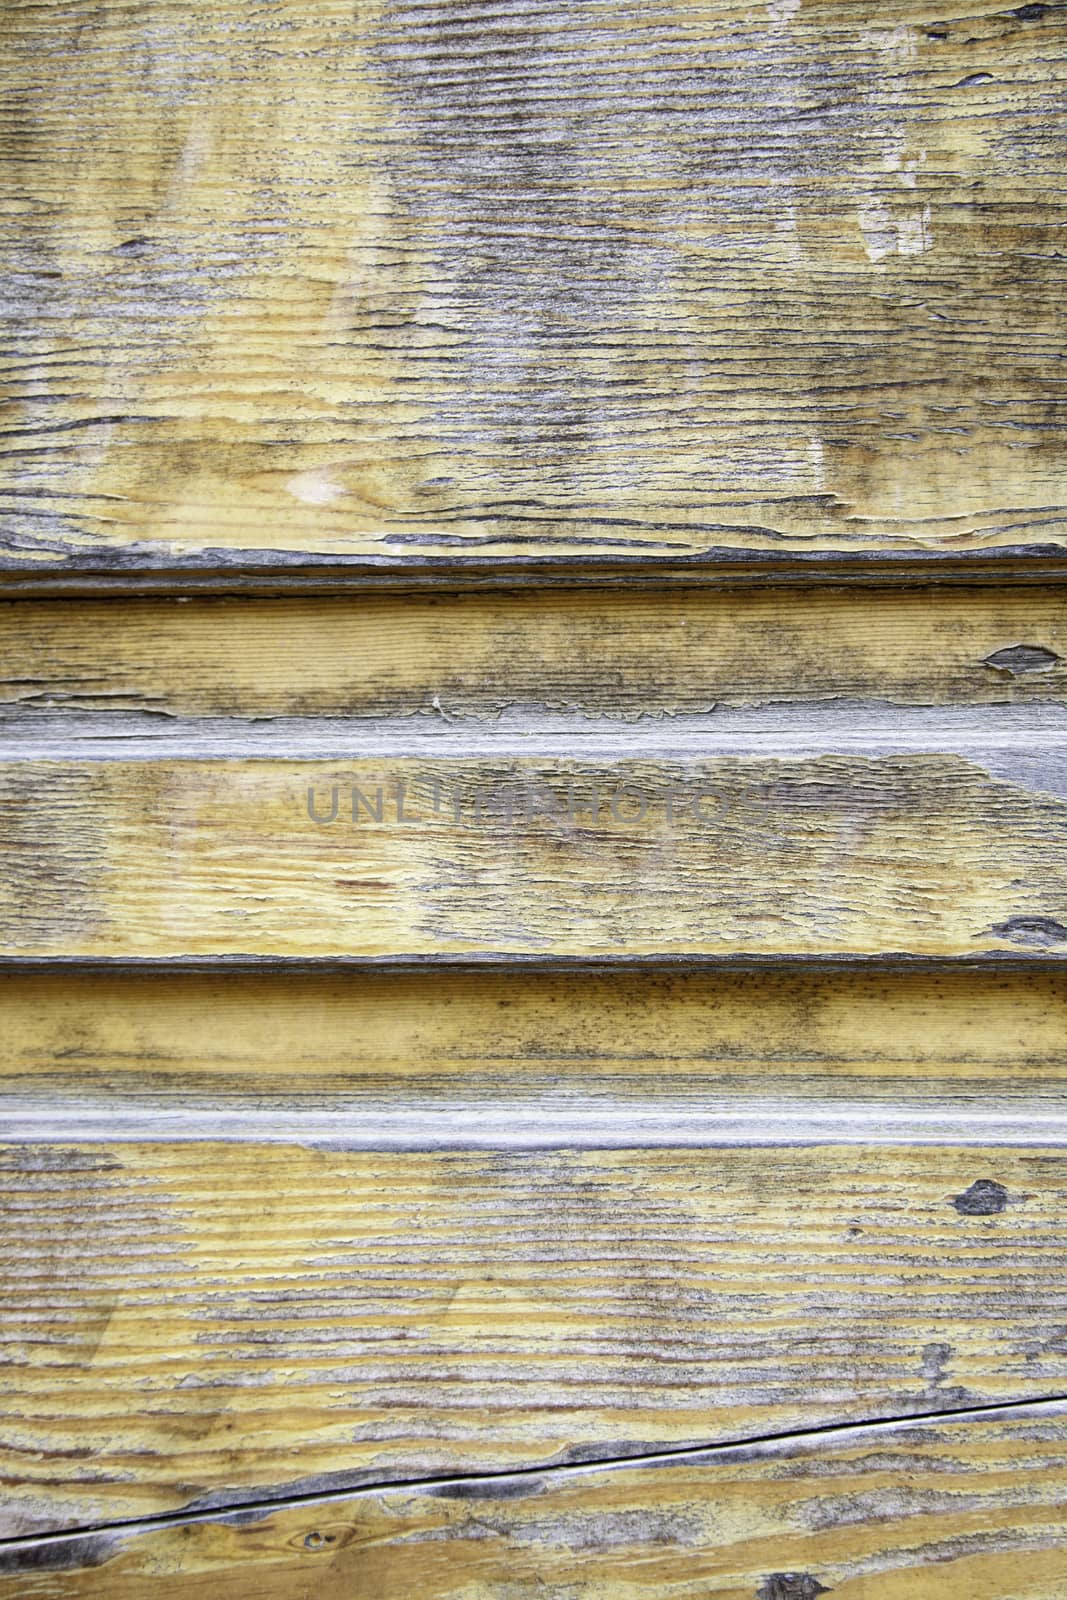 Broken wood, detail of a wall decorated with old wood, paint and mold